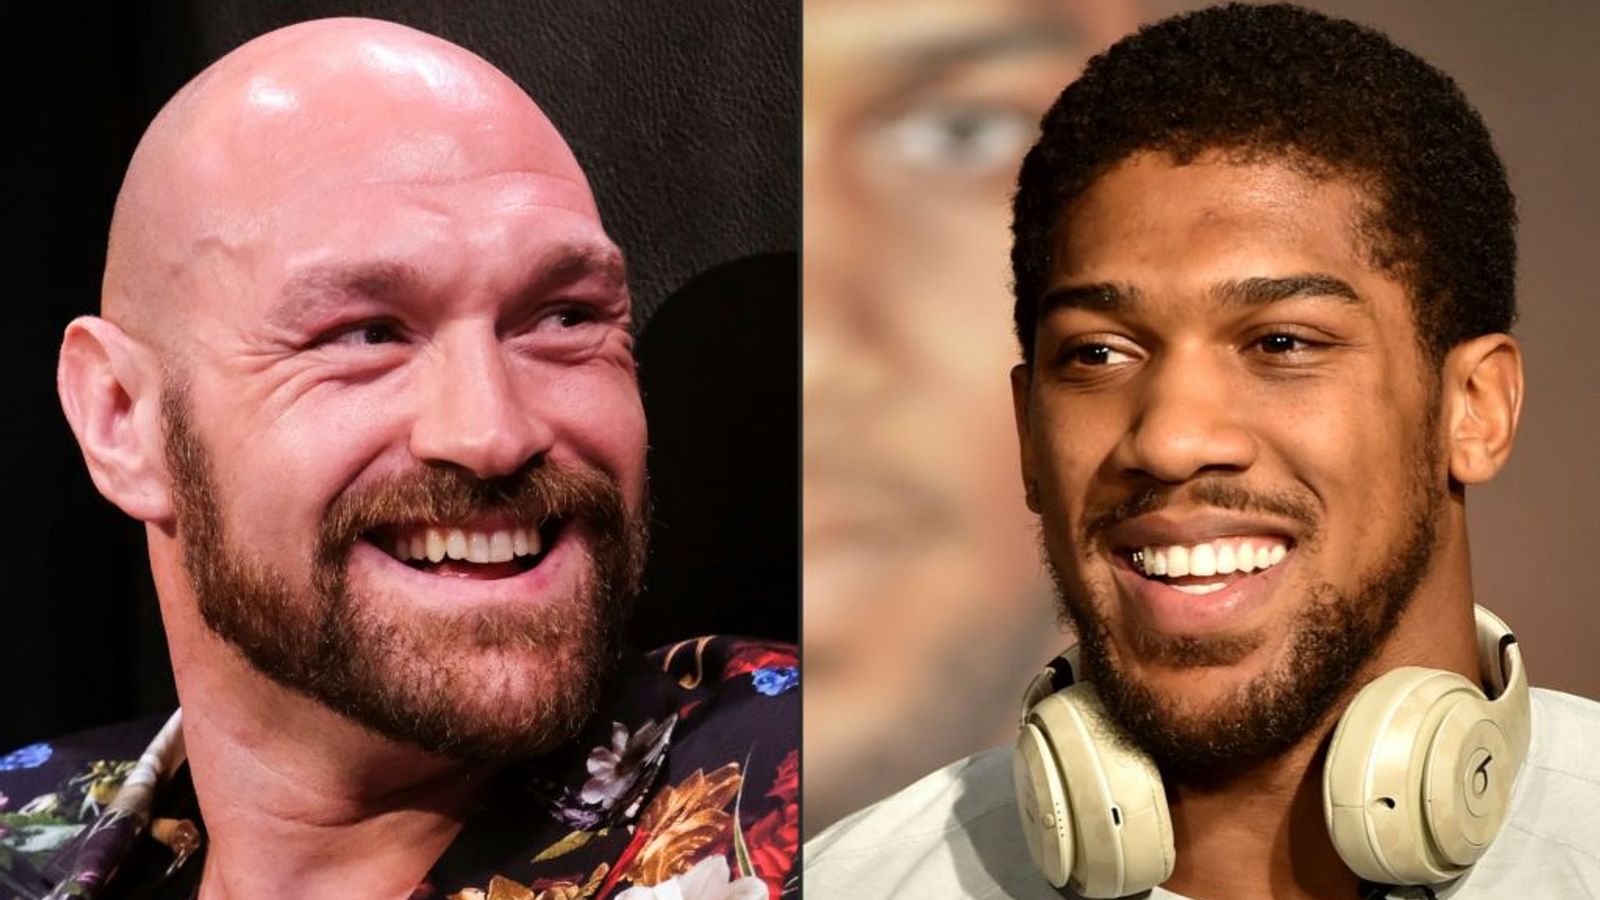 Anthony Joshua responds to Tyson Fury's offer of British heavyweight clash, insisting he'll be 'ready in December'